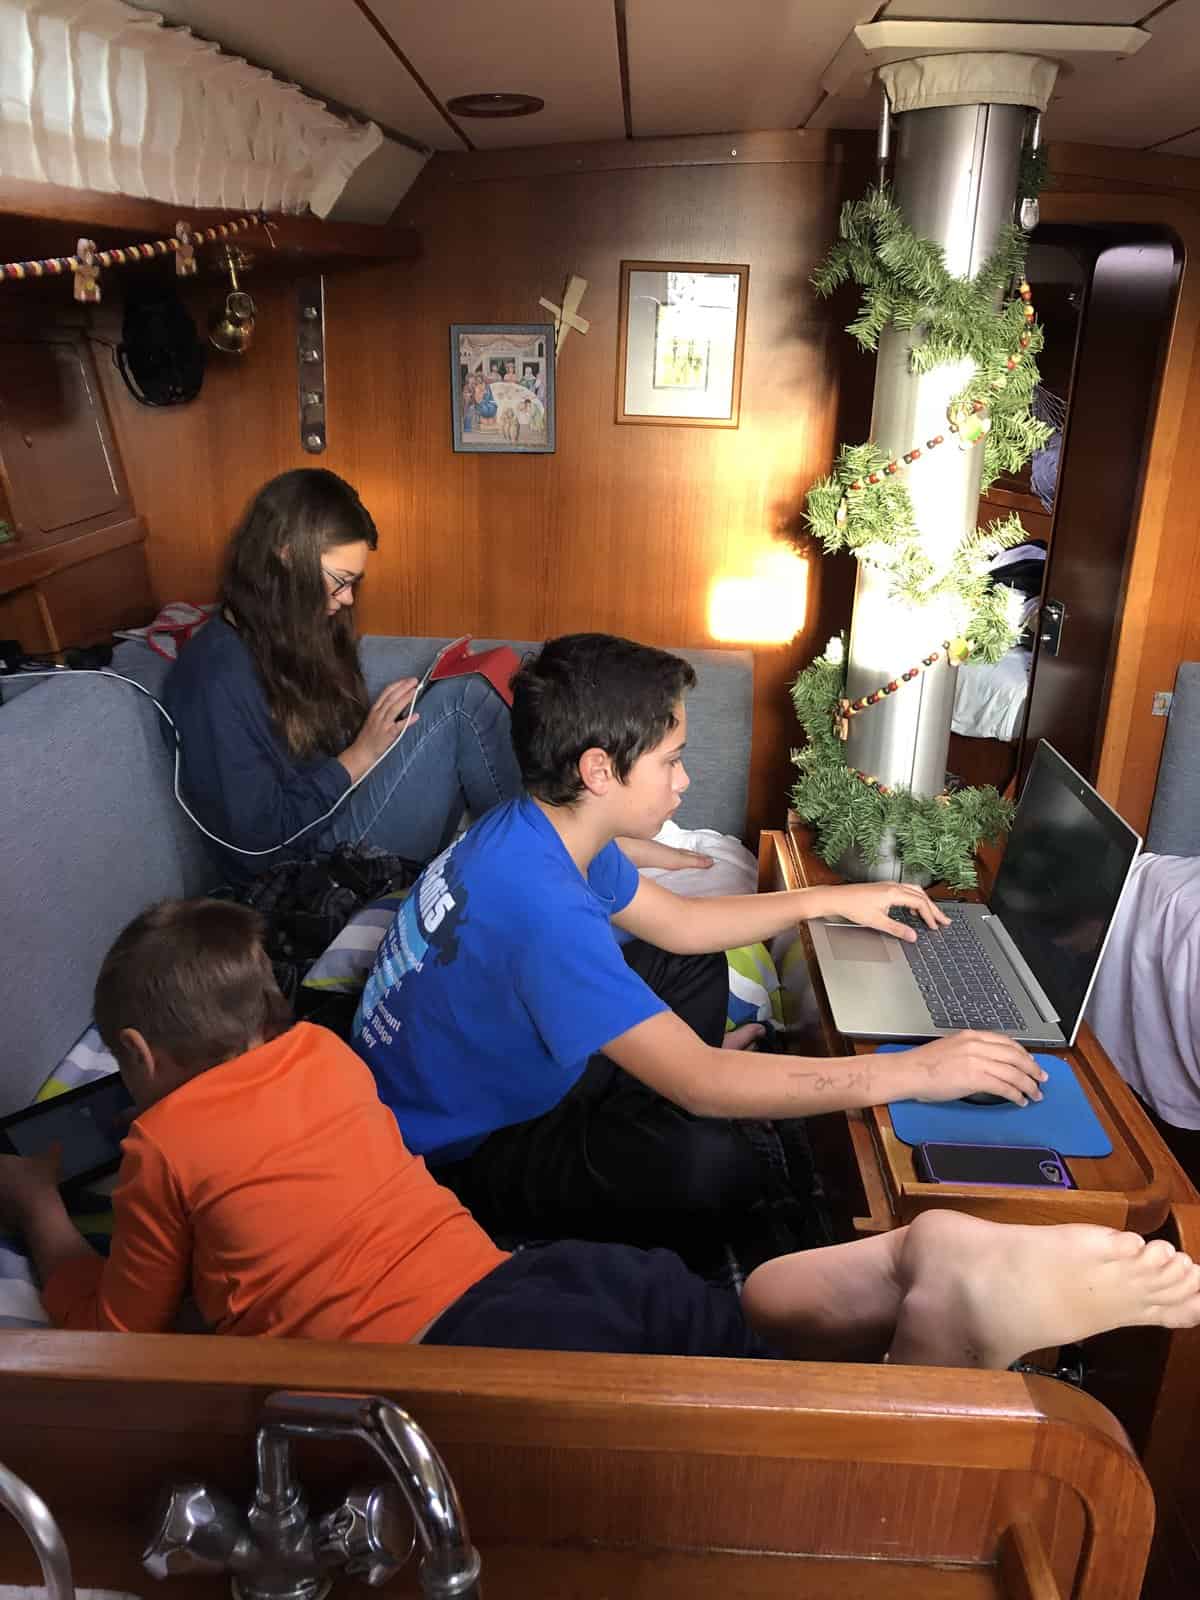 The kids sitting in front of screen. To remove suburbia stuff and travel is not that easy, if no one is paying attention.